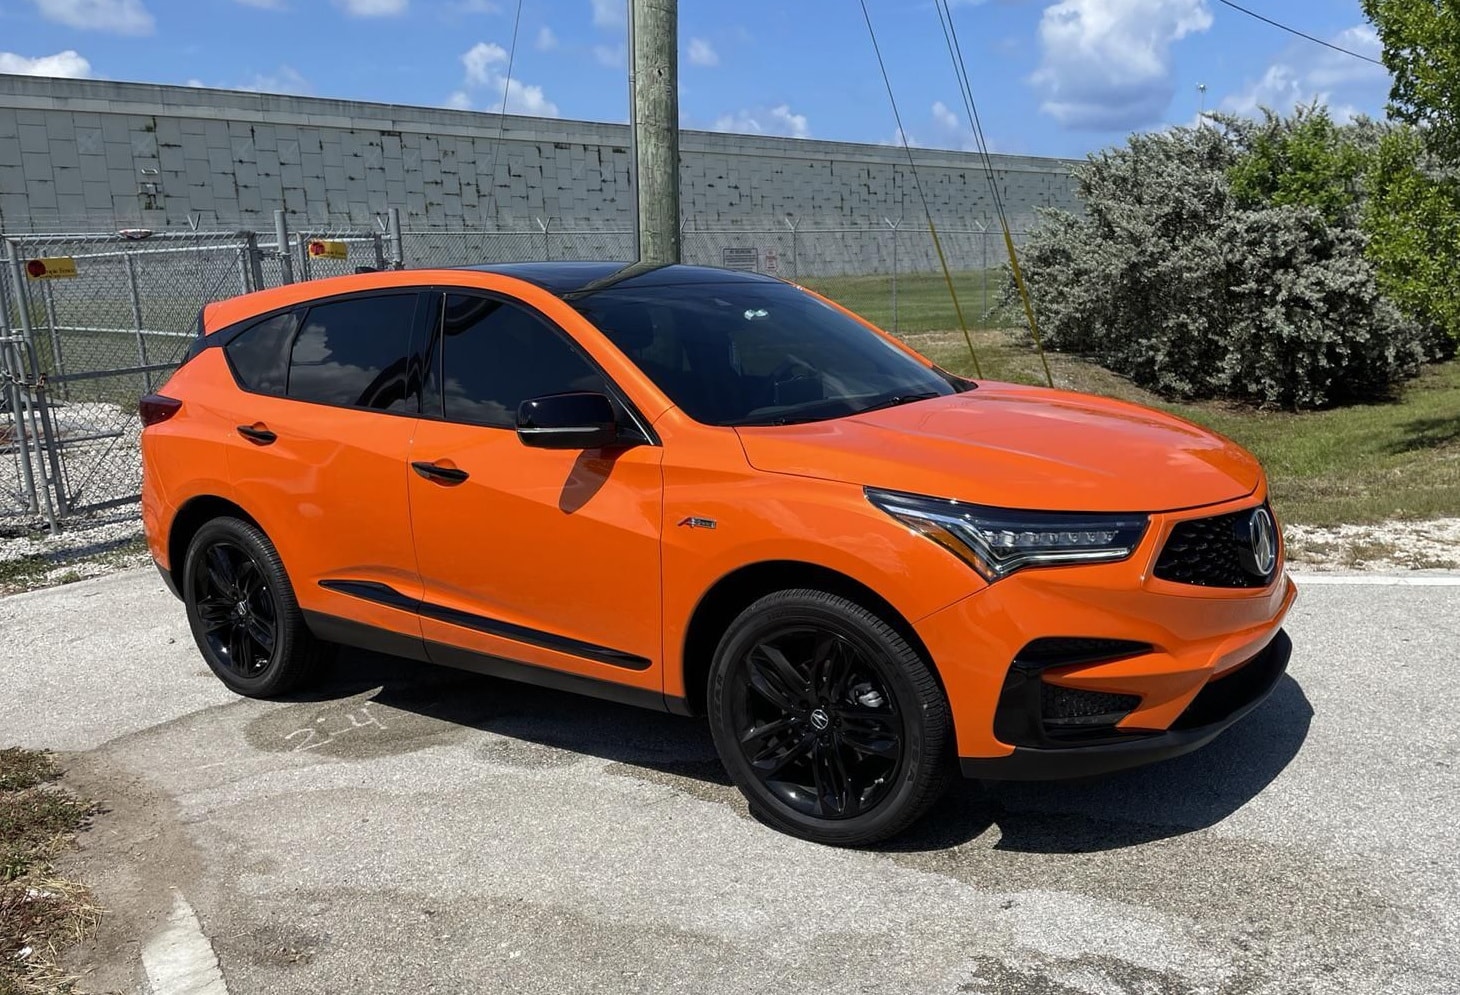 Rare 2021 Acura RDX PMC Edition up for Grabs With Spectacular